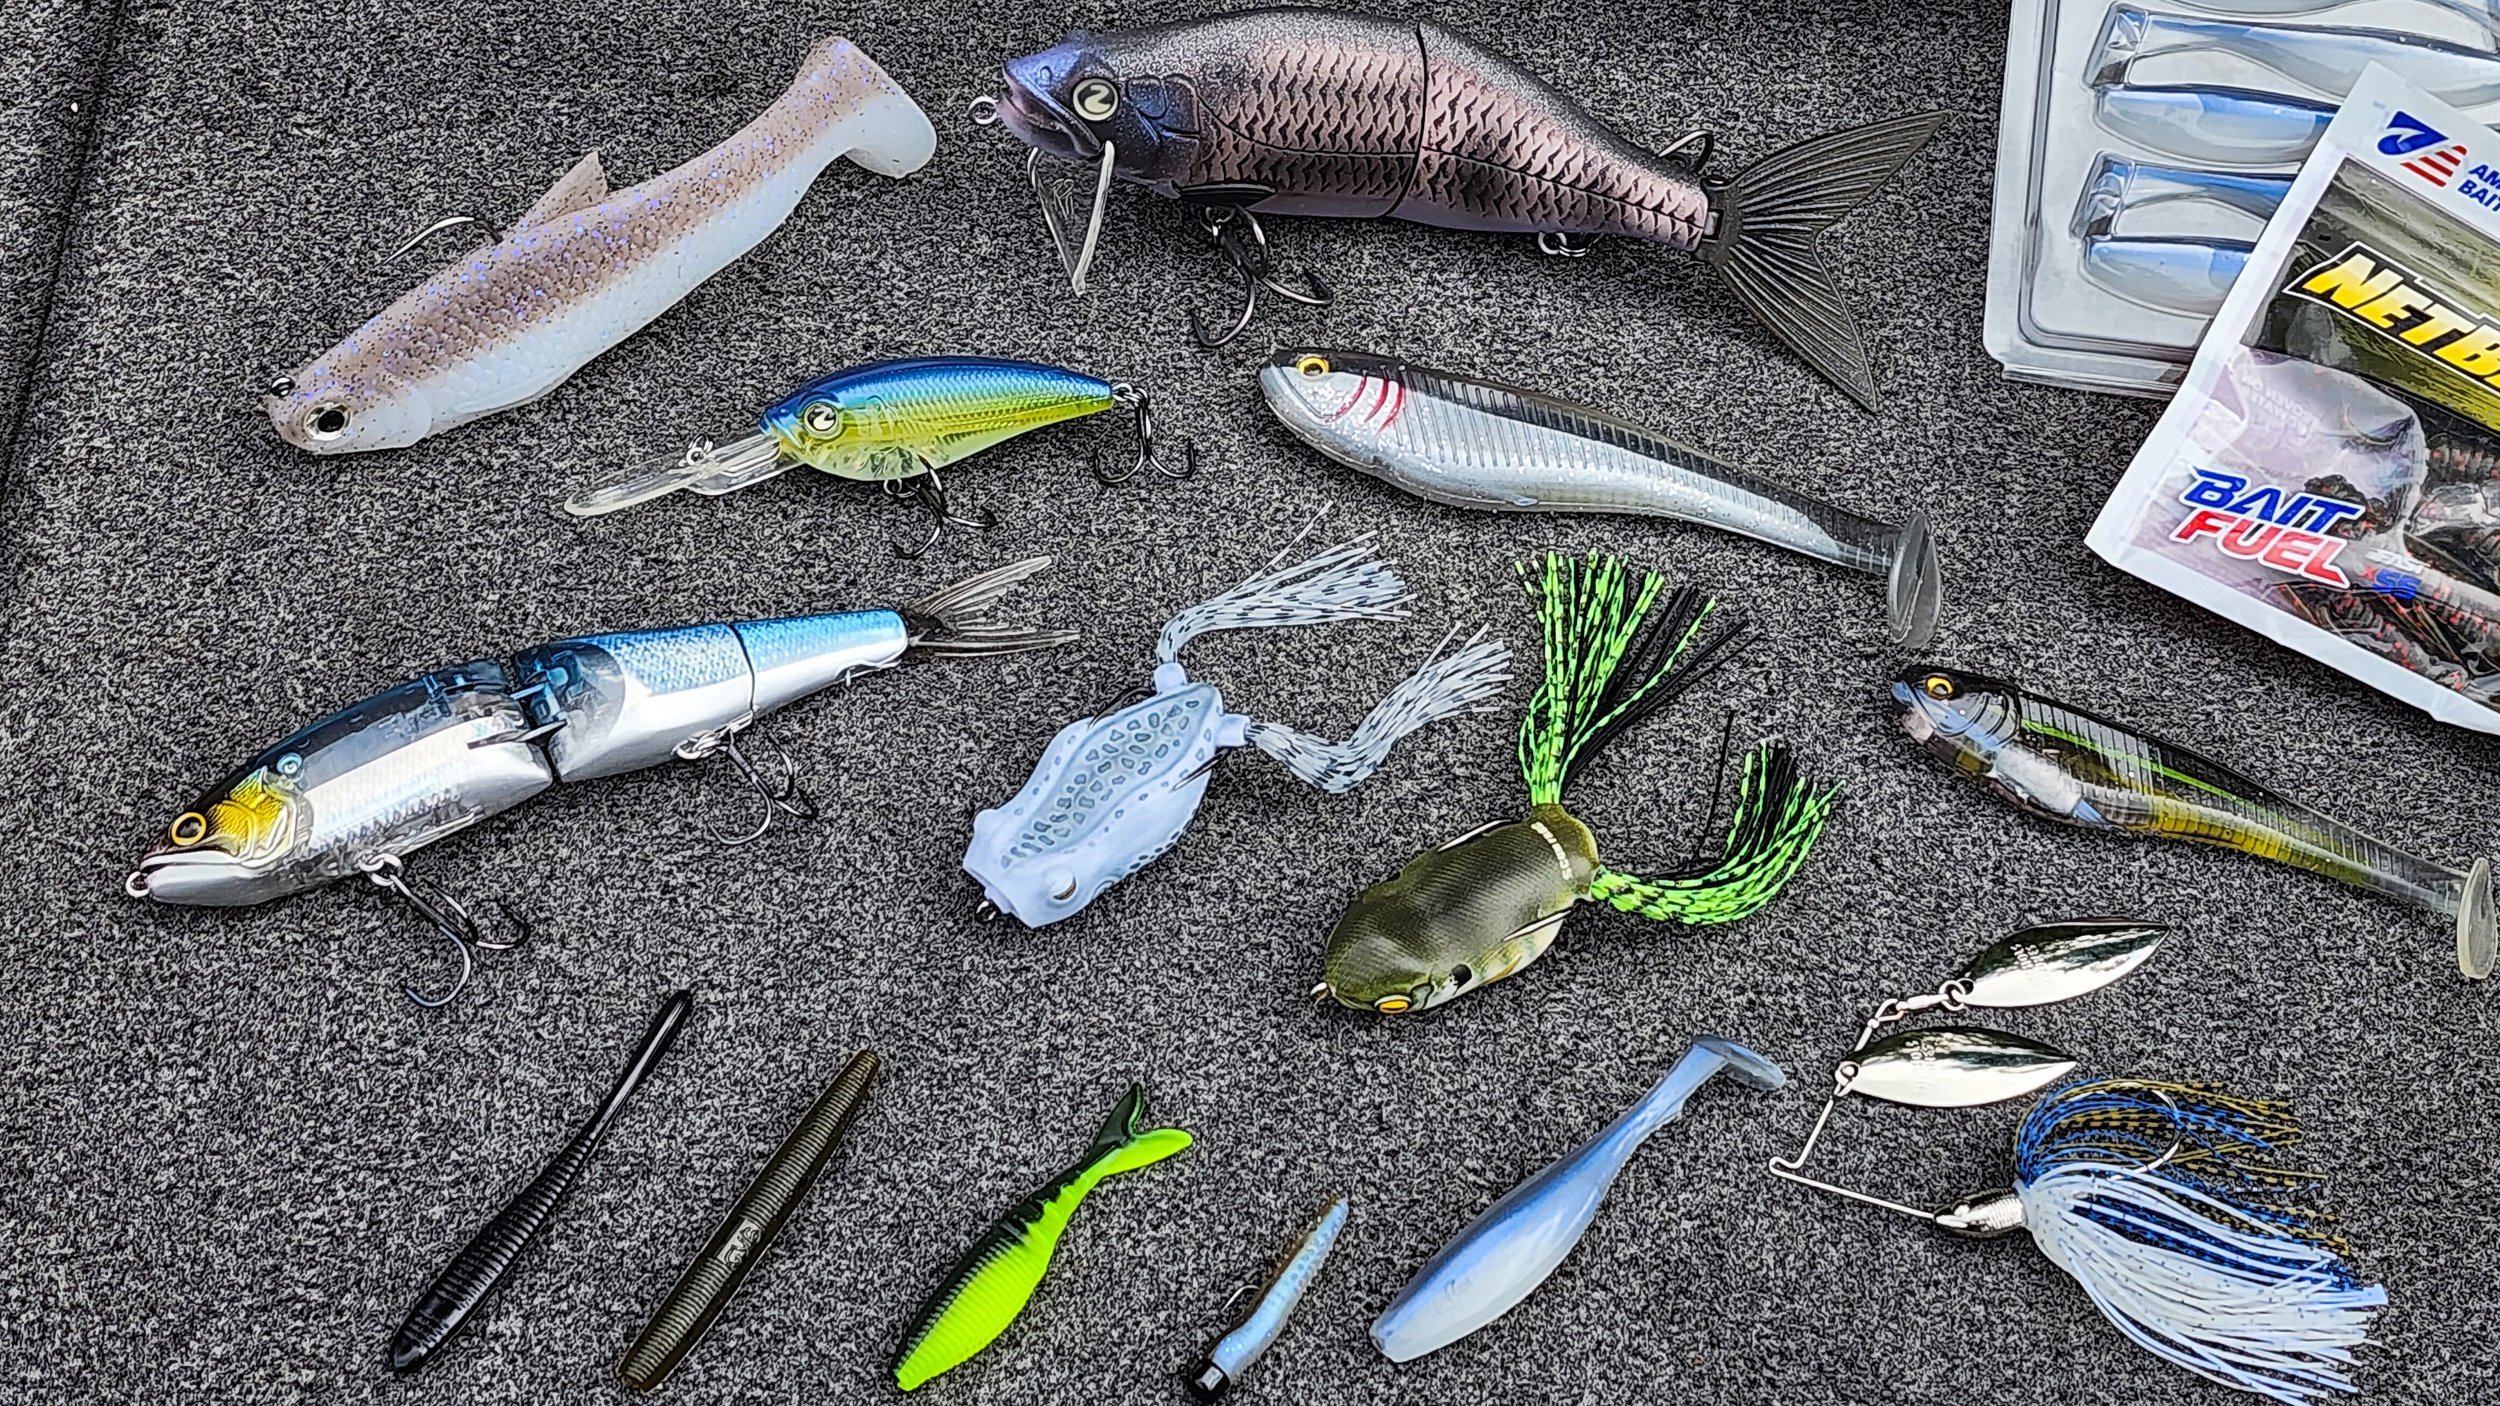 Summer Gear Review! Top Rods, Baits, Tackle, ICAST 2022 New